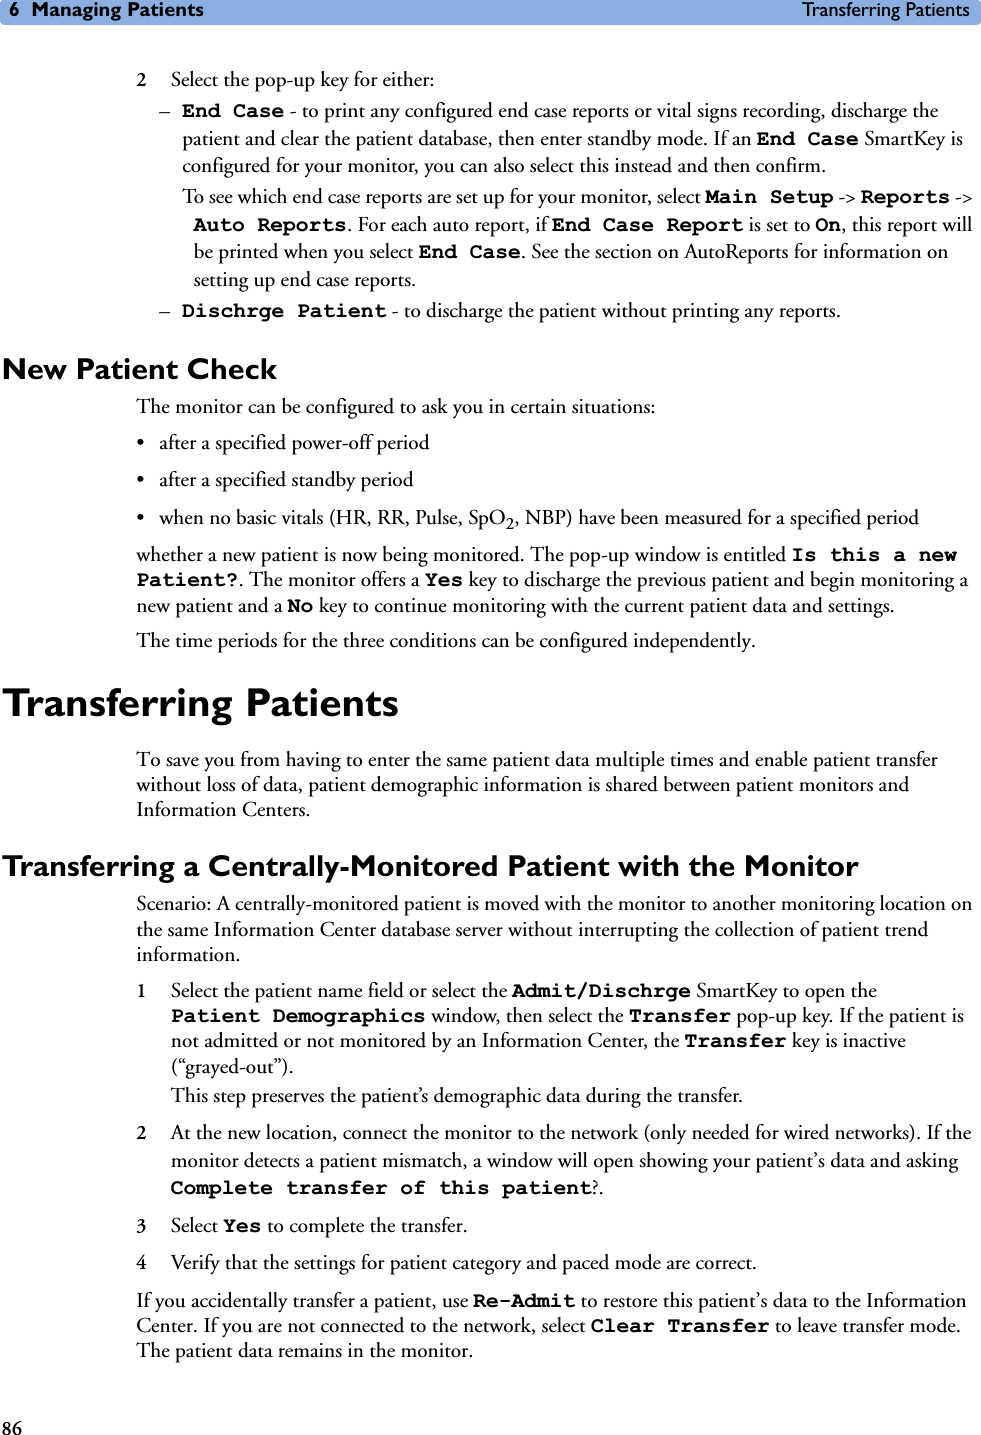 6 Managing Patients Transferring Patients862Select the pop-up key for either:–End Case - to print any configured end case reports or vital signs recording, discharge the patient and clear the patient database, then enter standby mode. If an End Case SmartKey is configured for your monitor, you can also select this instead and then confirm. To see which end case reports are set up for your monitor, select Main Setup -&gt; Reports -&gt; Auto Reports. For each auto report, if End Case Report is set to On, this report will be printed when you select End Case. See the section on AutoReports for information on setting up end case reports. –Dischrge Patient - to discharge the patient without printing any reports. New Patient CheckThe monitor can be configured to ask you in certain situations:• after a specified power-off period• after a specified standby period• when no basic vitals (HR, RR, Pulse, SpO2, NBP) have been measured for a specified periodwhether a new patient is now being monitored. The pop-up window is entitled Is this a new Patient?. The monitor offers a Yes key to discharge the previous patient and begin monitoring a new patient and a No key to continue monitoring with the current patient data and settings. The time periods for the three conditions can be configured independently. Transferring PatientsTo save you from having to enter the same patient data multiple times and enable patient transfer without loss of data, patient demographic information is shared between patient monitors and Information Centers.Transferring a Centrally-Monitored Patient with the MonitorScenario: A centrally-monitored patient is moved with the monitor to another monitoring location on the same Information Center database server without interrupting the collection of patient trend information.1Select the patient name field or select the Admit/Dischrge SmartKey to open the Patient Demographics window, then select the Transfer pop-up key. If the patient is not admitted or not monitored by an Information Center, the Transfer key is inactive (“grayed-out”). This step preserves the patient’s demographic data during the transfer. 2At the new location, connect the monitor to the network (only needed for wired networks). If the monitor detects a patient mismatch, a window will open showing your patient’s data and asking Complete transfer of this patient?.3Select Yes to complete the transfer.4Verify that the settings for patient category and paced mode are correct. If you accidentally transfer a patient, use Re-Admit to restore this patient’s data to the Information Center. If you are not connected to the network, select Clear Transfer to leave transfer mode. The patient data remains in the monitor.